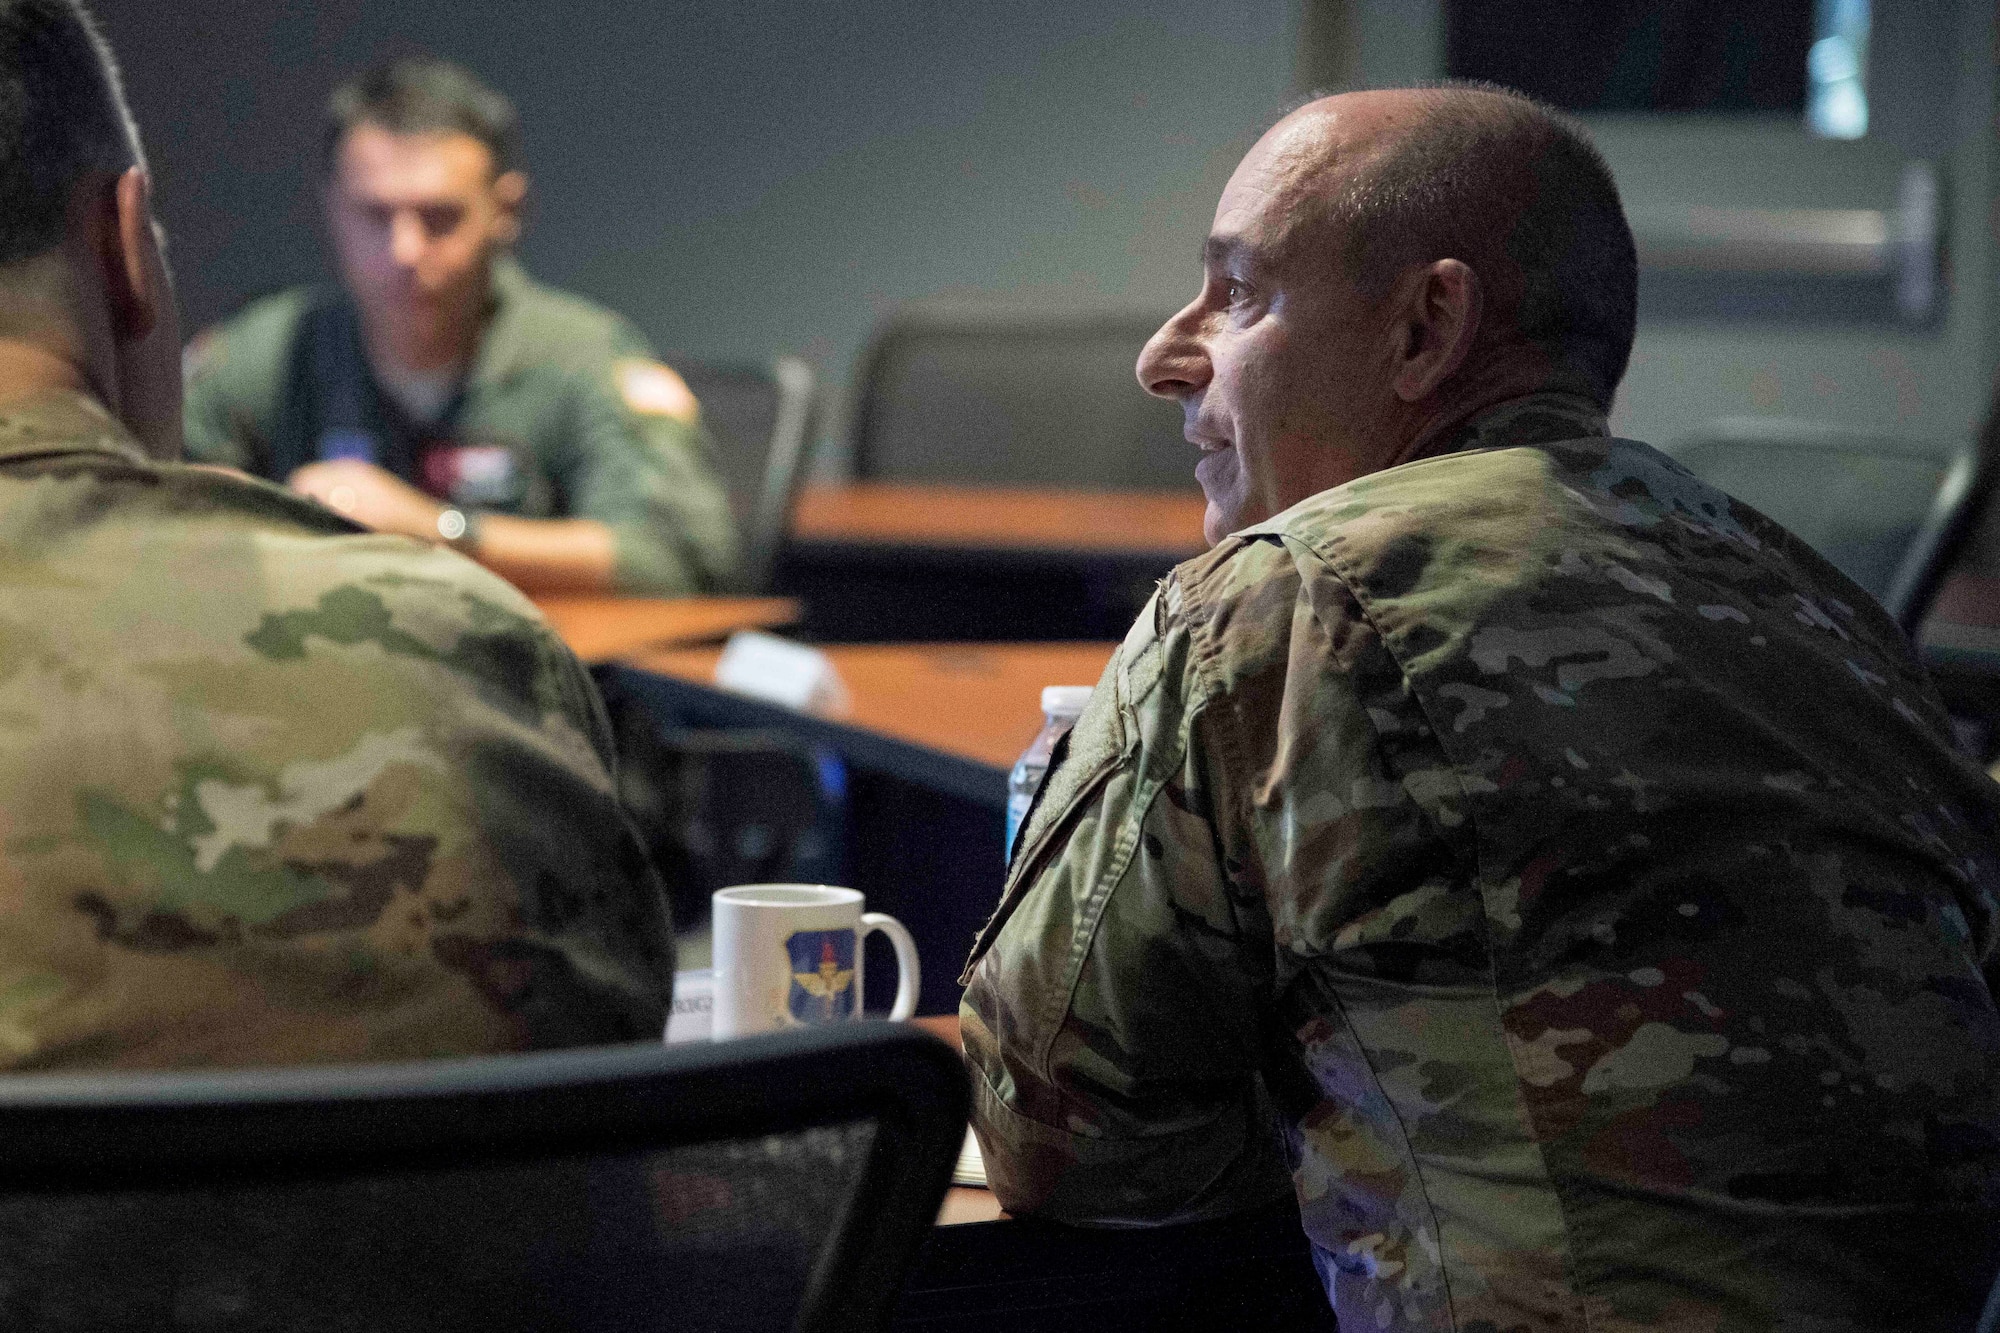 Gen. Jeffrey L. Harrigian, United States Air Forces Europe and United States Air Forces Africa commander, listens during a briefing on the training capabilities of Pilot Training Next during a visit to Detachment 24 at Joint Base San Antonio-Randolph, Texas, June 24, 2019.  PTN is an Air Education and Training Command program to explore and prototype a pilot training environment that integrates various technologies to produce pilots in a learning-focused manner. (U.S. Air Force photo by Sean M. Worrell)